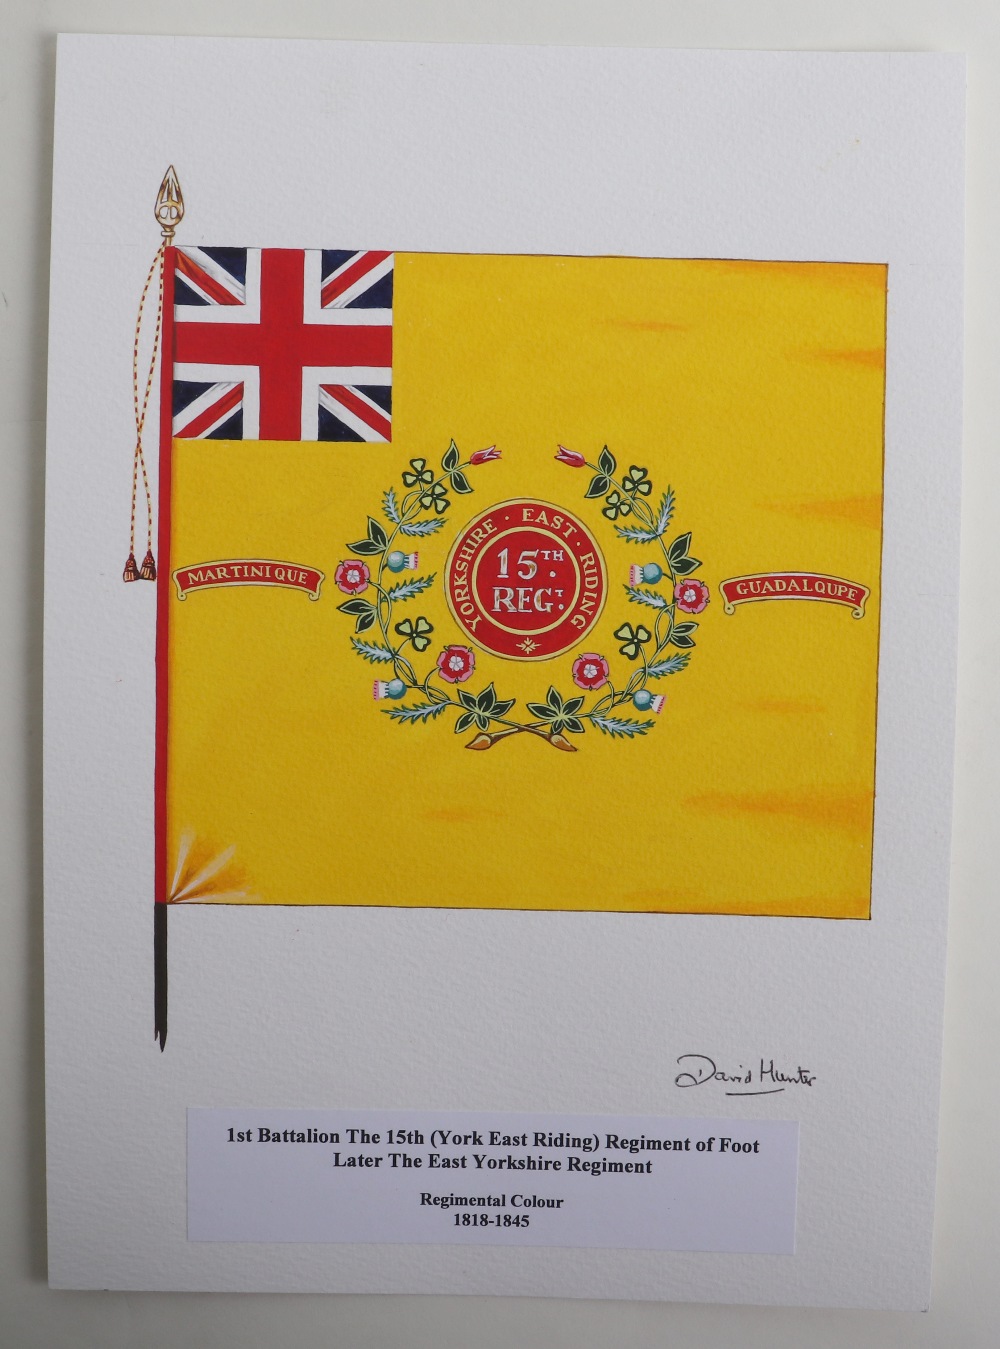 David J Hunter Regimental Colours of The 1st Battalion The 15th (York East Riding) Regiment of Foot - Image 2 of 3